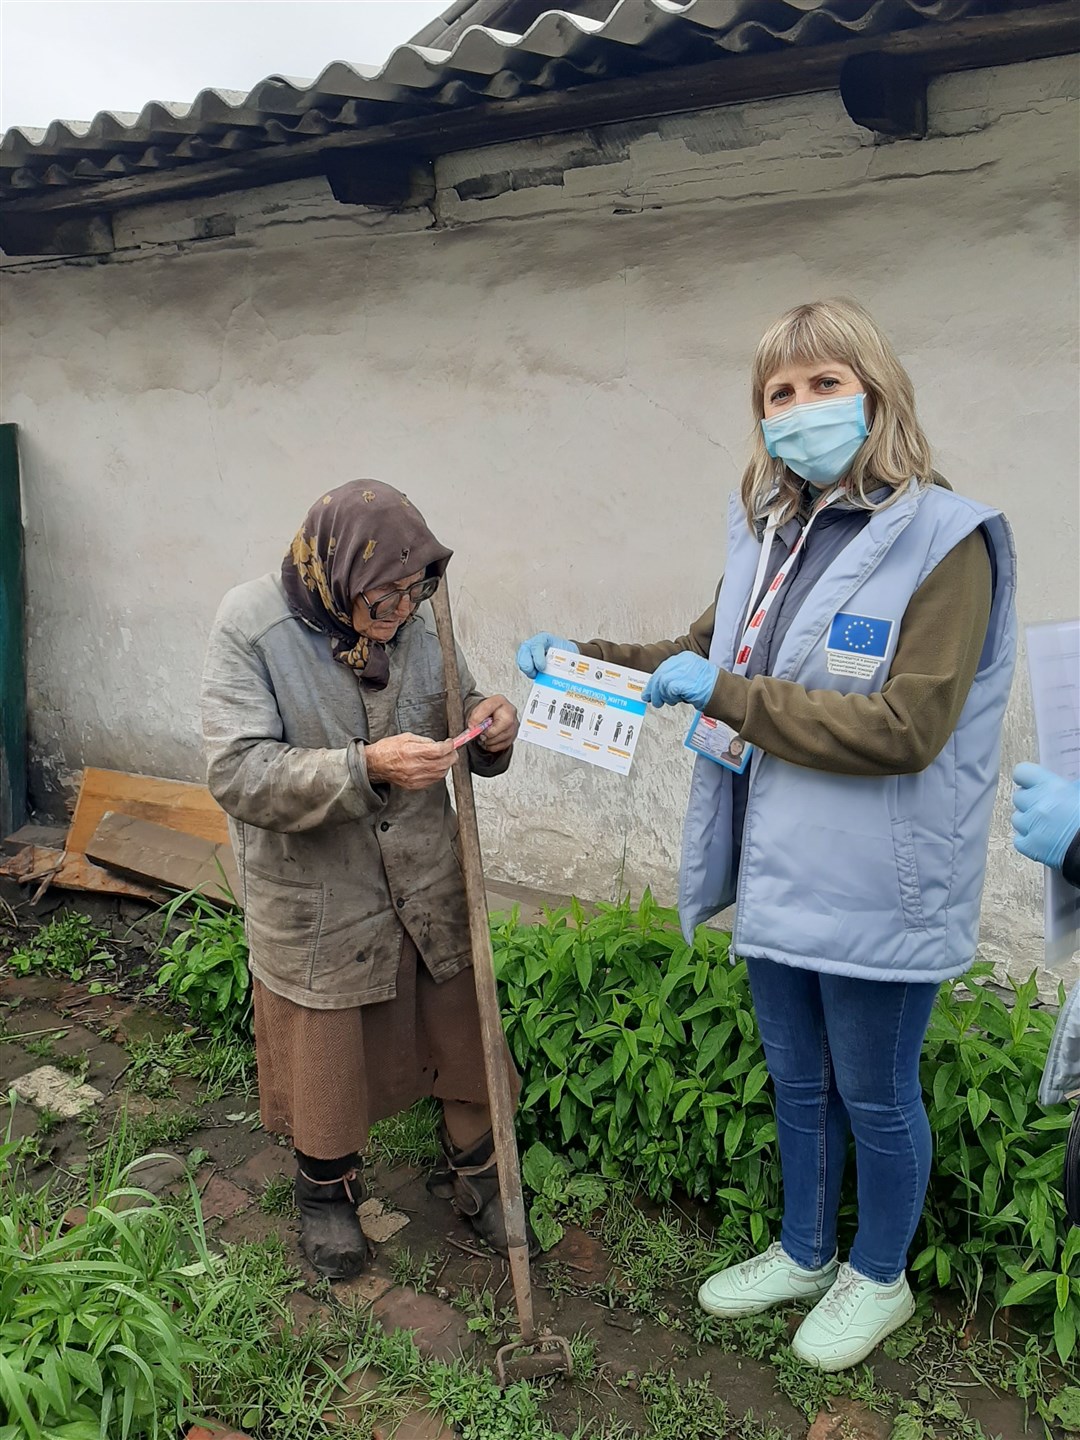 A HelpAge volunteer working in the east of Ukraine during the conflict which has been ongoing since 2014.